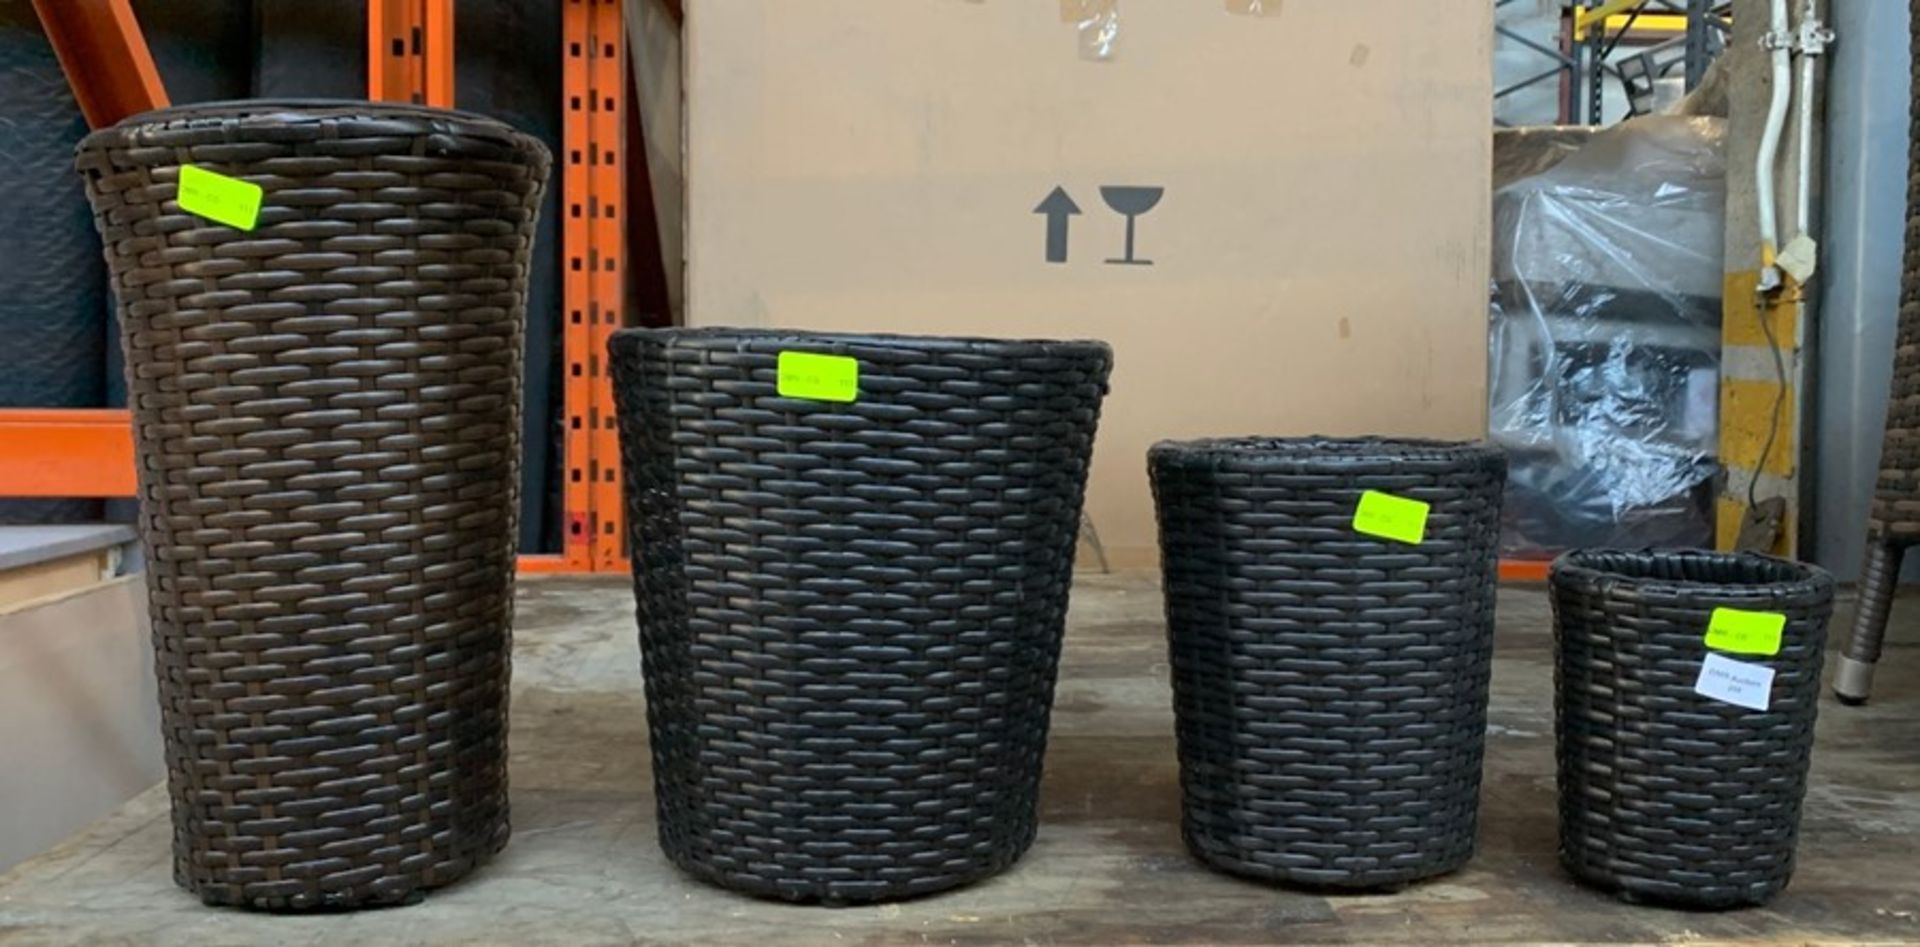 A SET OF 4 RATTAN PLANTERS, 2 IN BROWN AND 2 IN BLACK (PUBLIC VIEWING AVAILABLE)